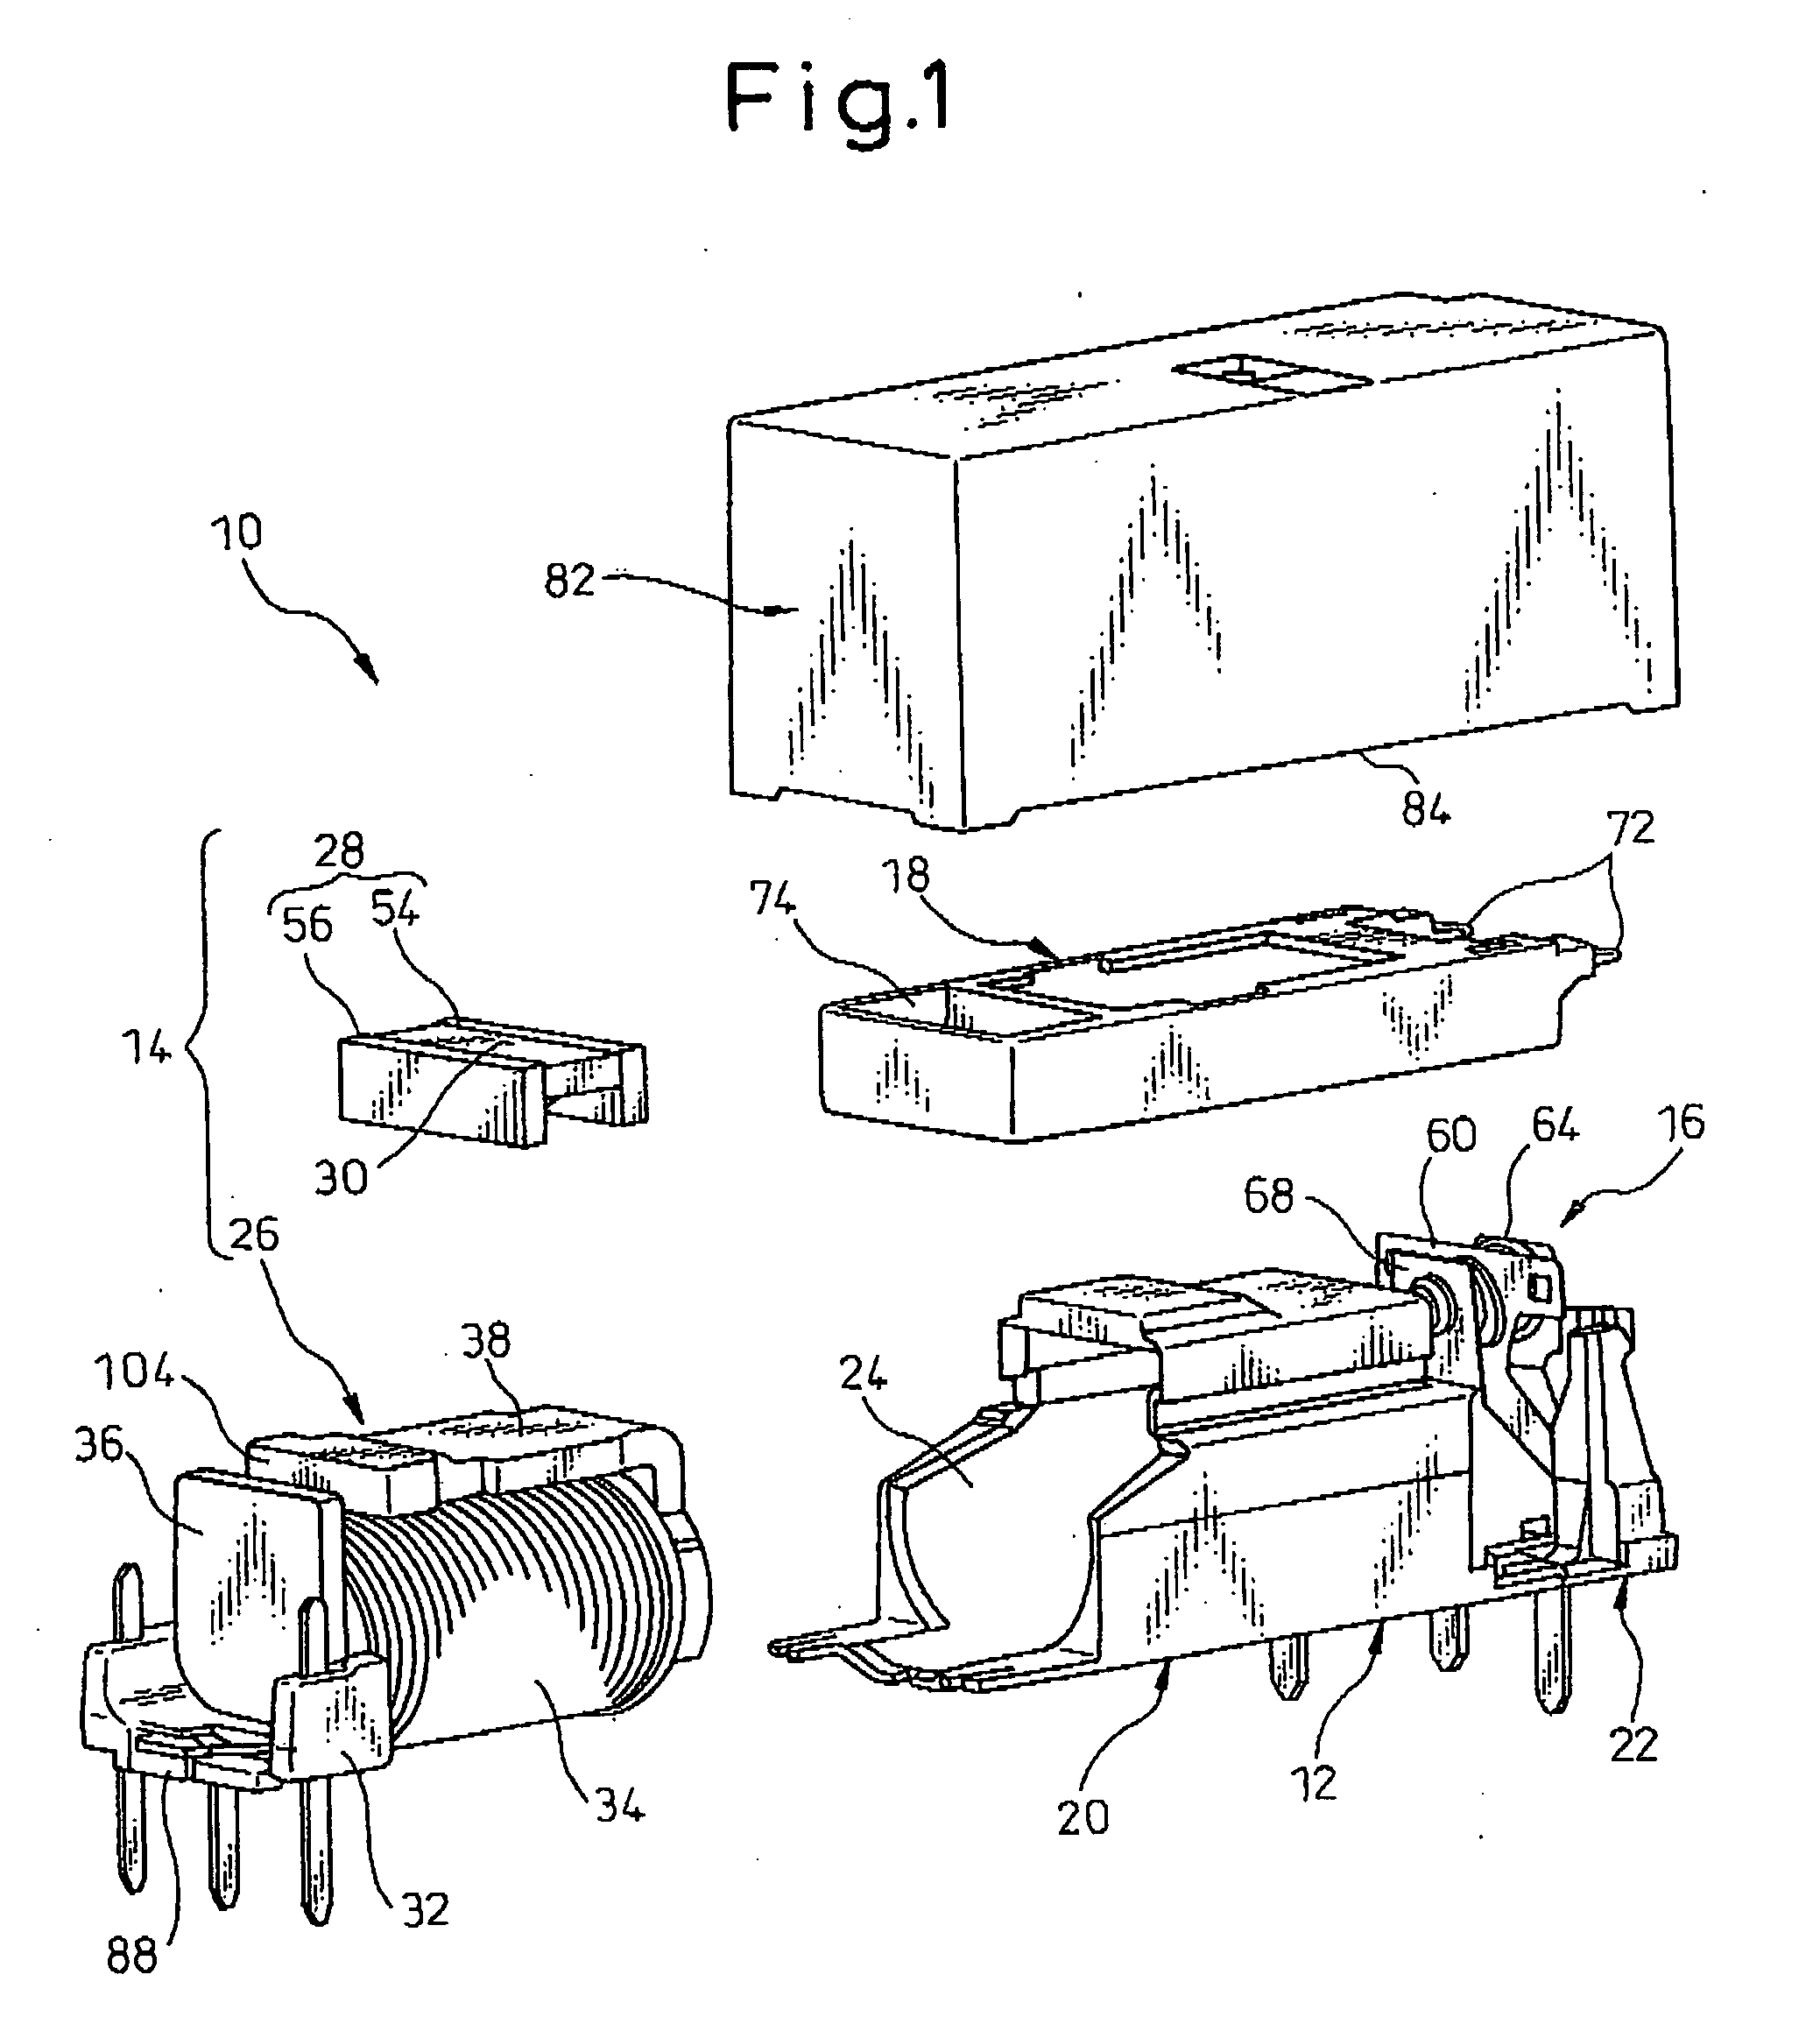 Polarized electromagnetic relay and coil assembly